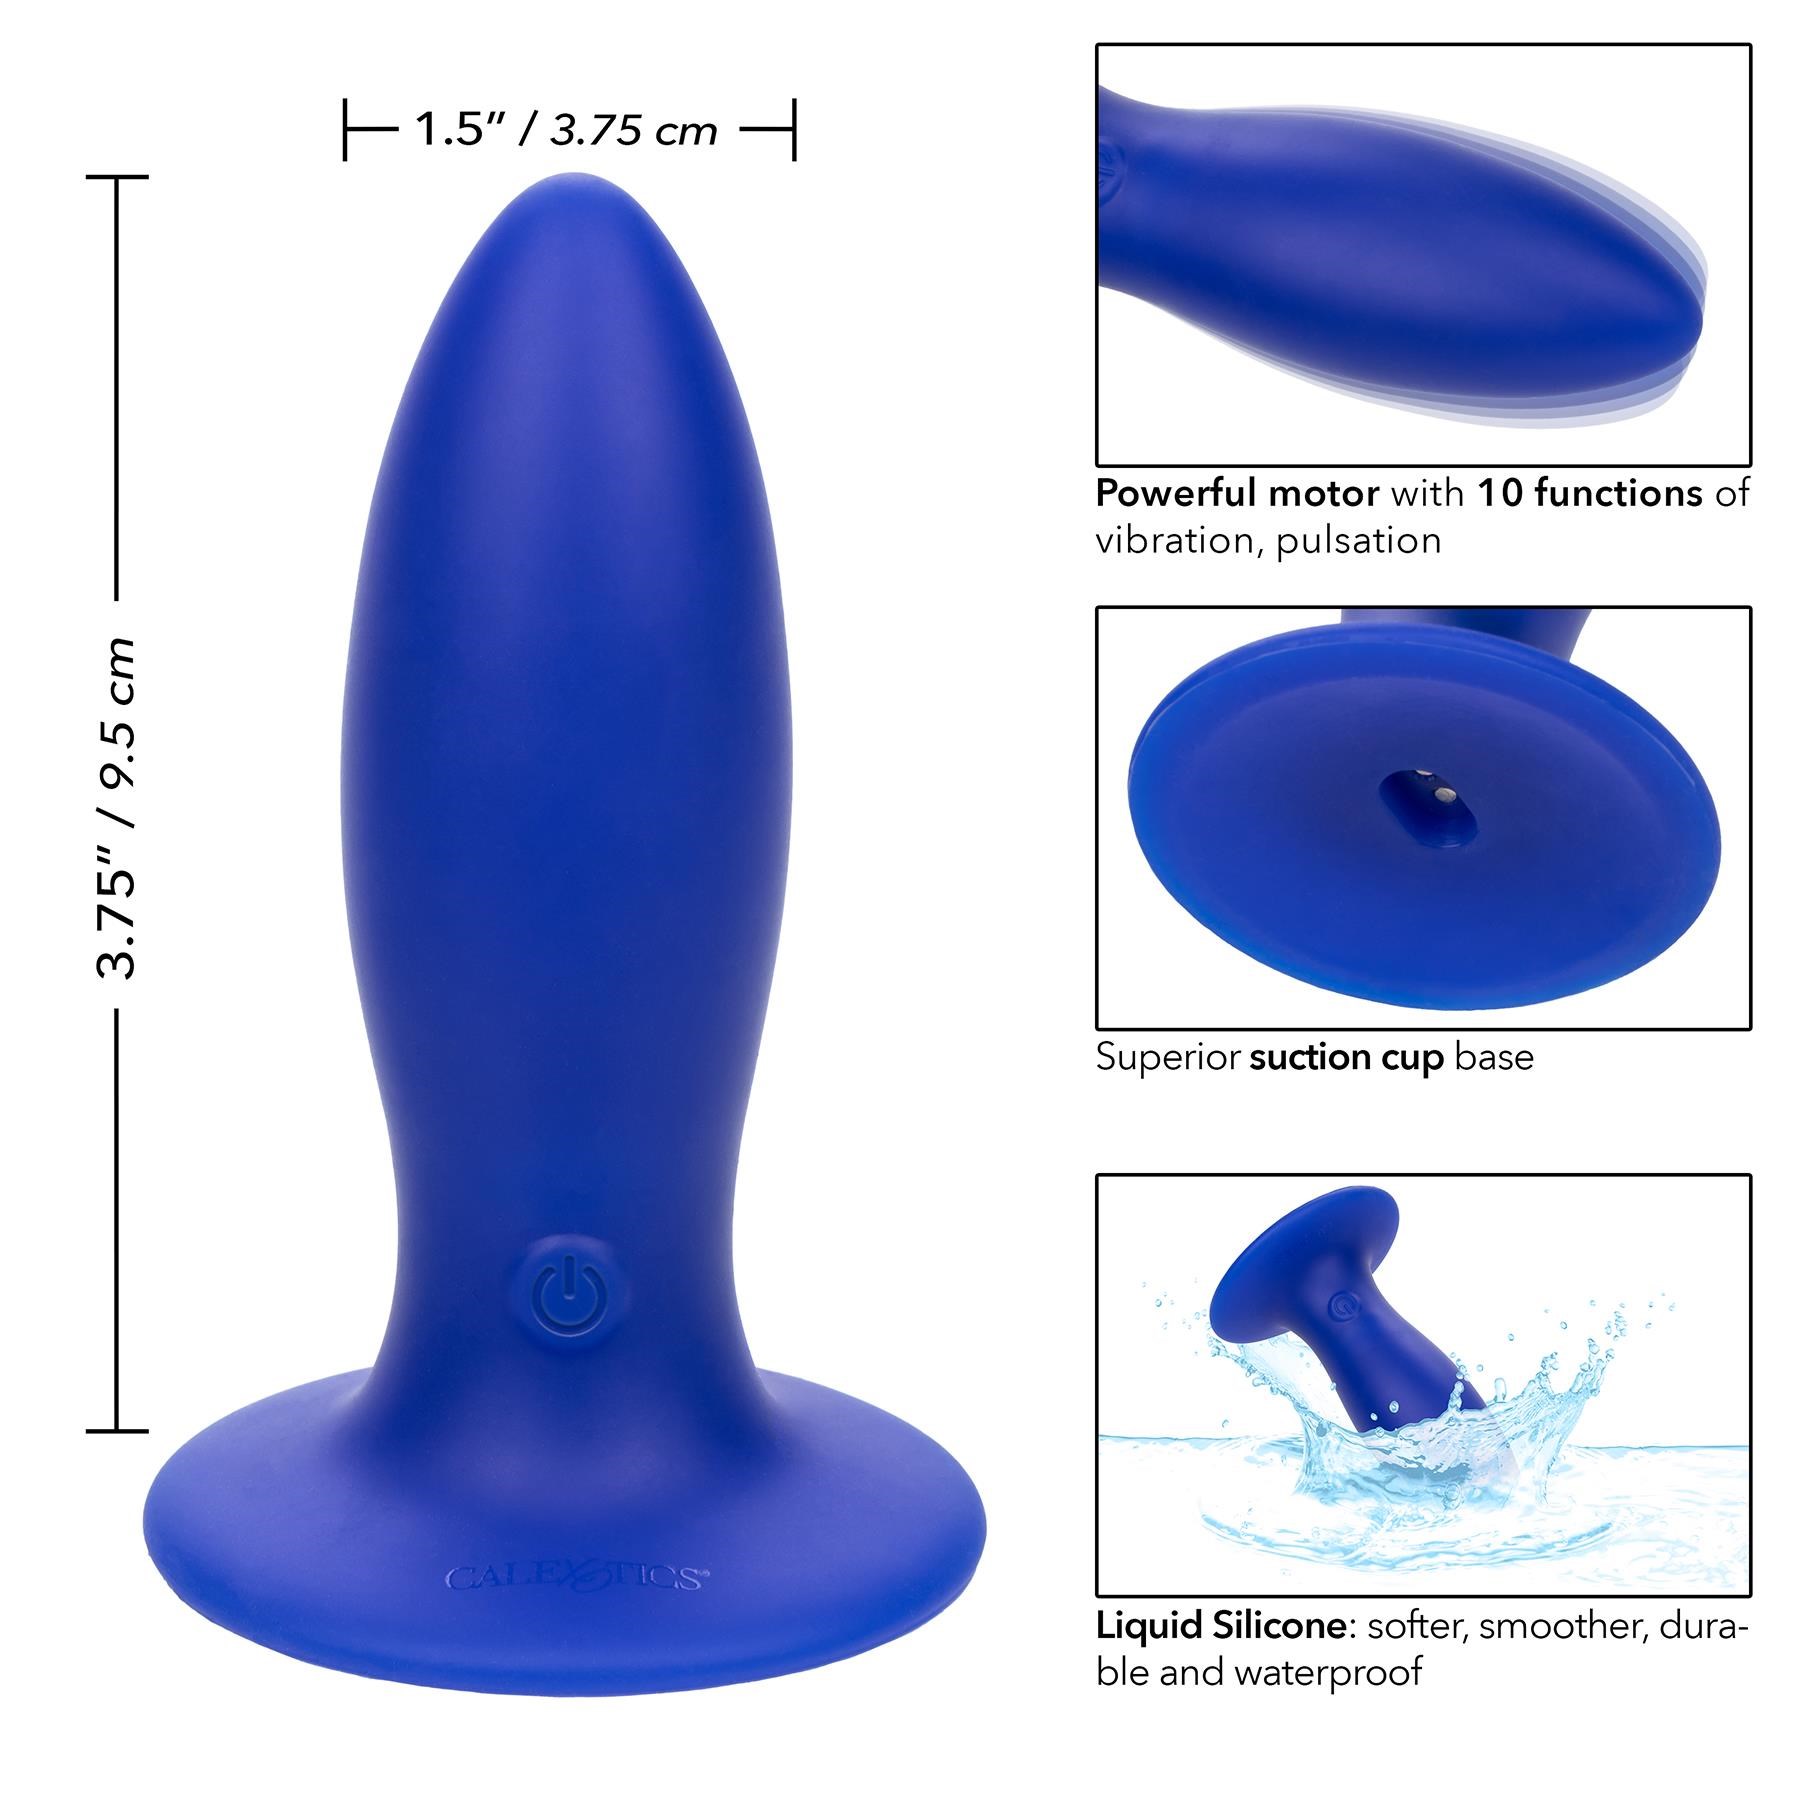 Admiral Liquid Silicone Vibrating Torpedo Anal Plug - Instructions and Dimensions